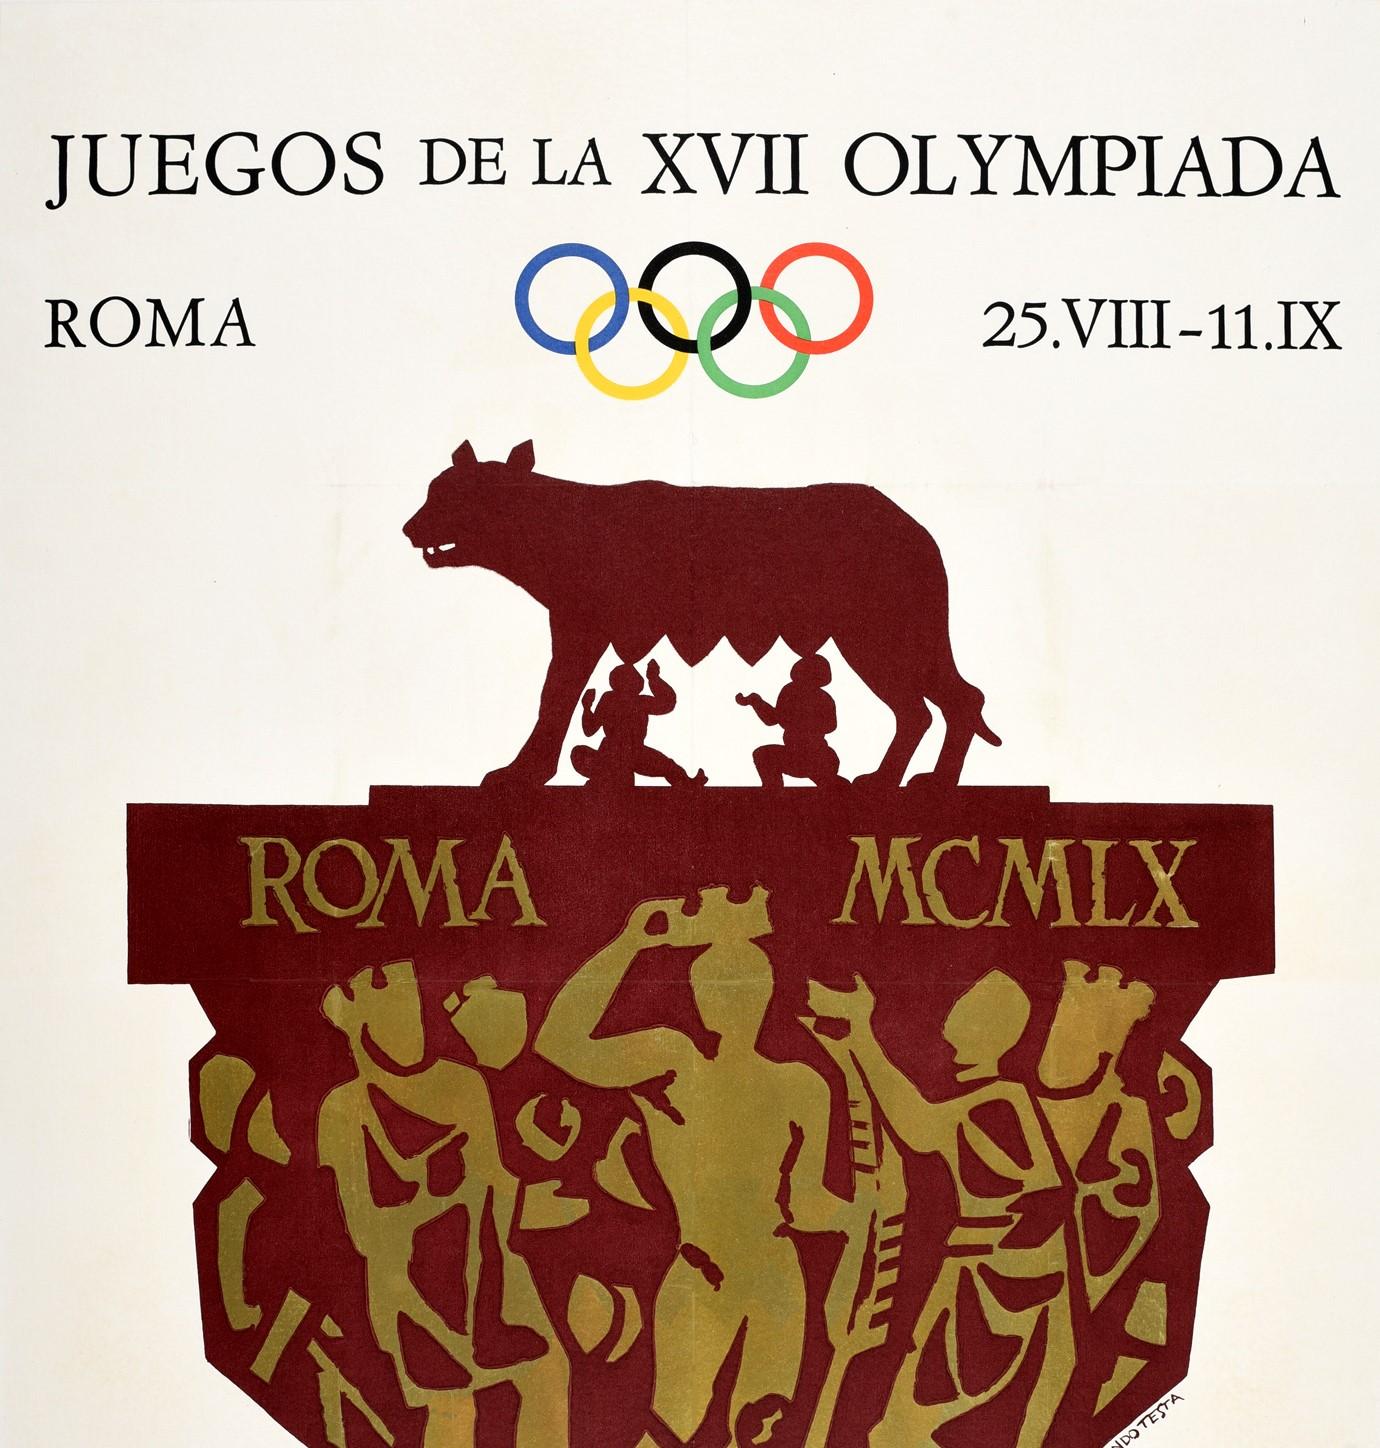 Original vintage sport poster for the Juegos de la XVII Olympiada Roma 25.VIII-11.IX featuring a great design by Armando Testa (1917-1992) depicting the twin brothers Romulus and Remus being suckled by the Capitoline Wolf (the ancient story from